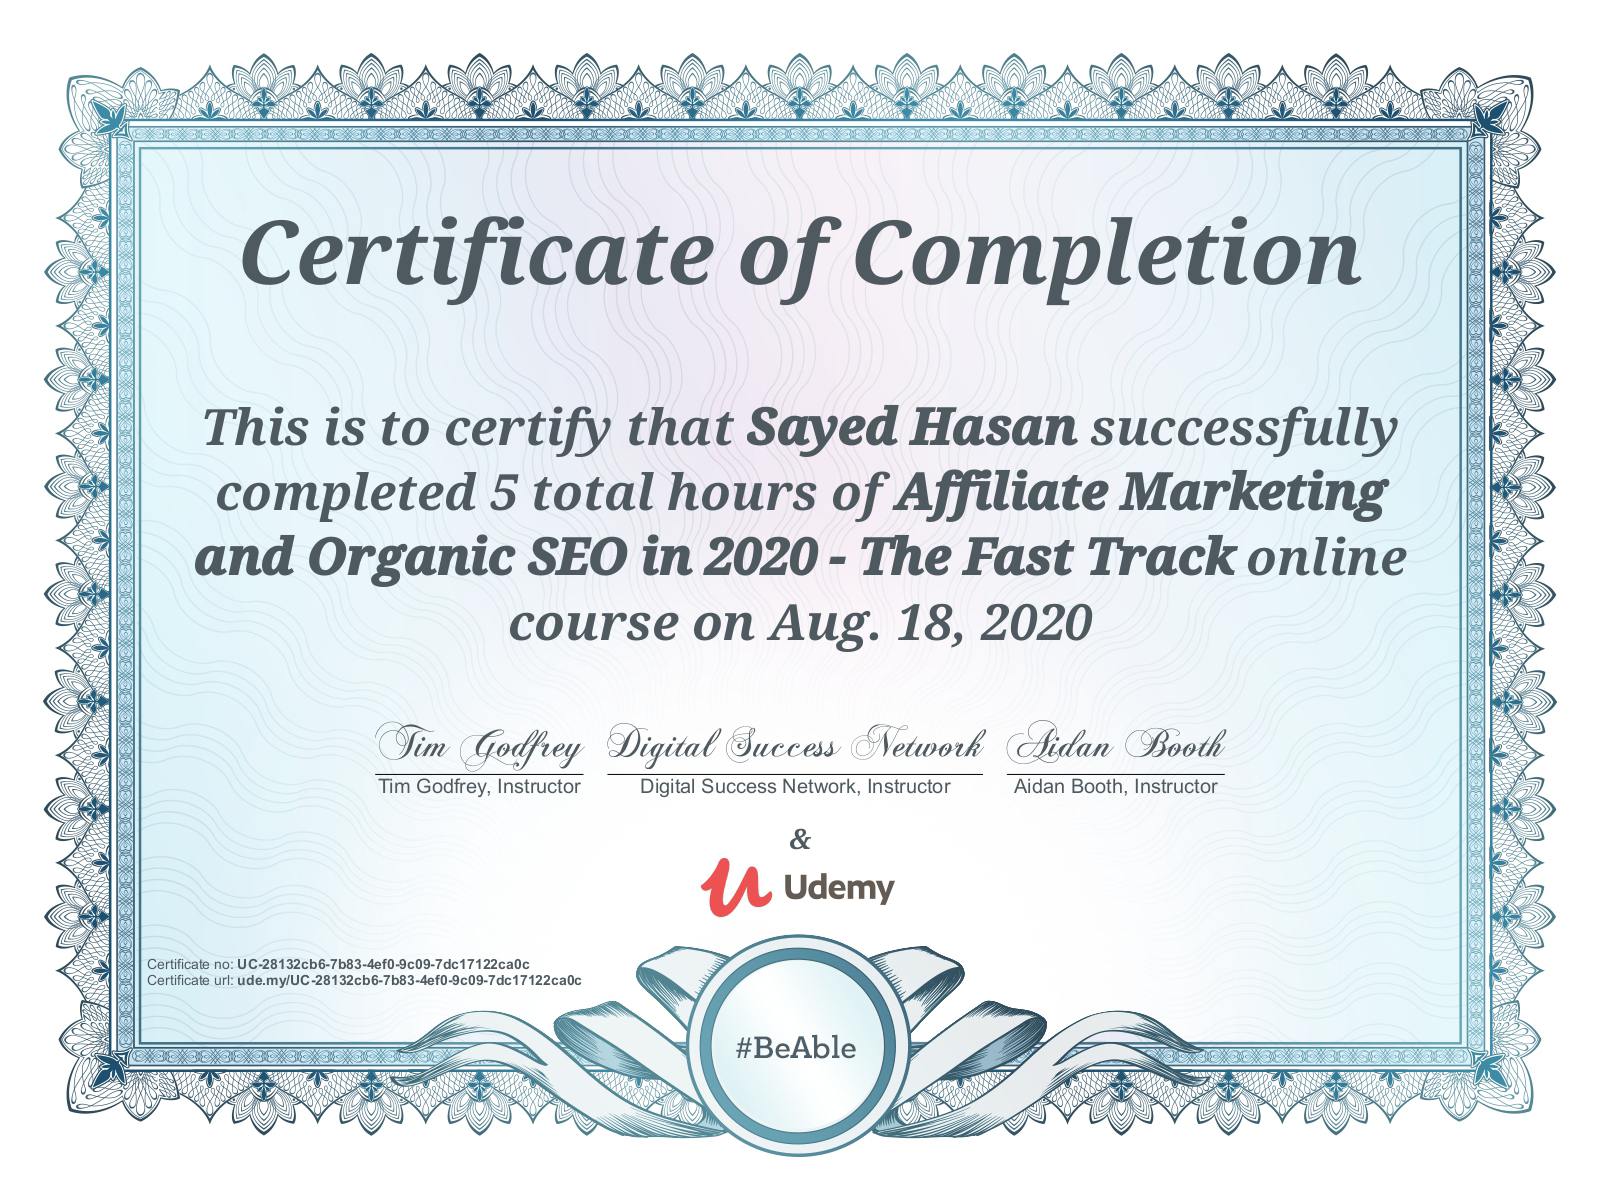 Sayed's certificate of SEO and affiliate marketing